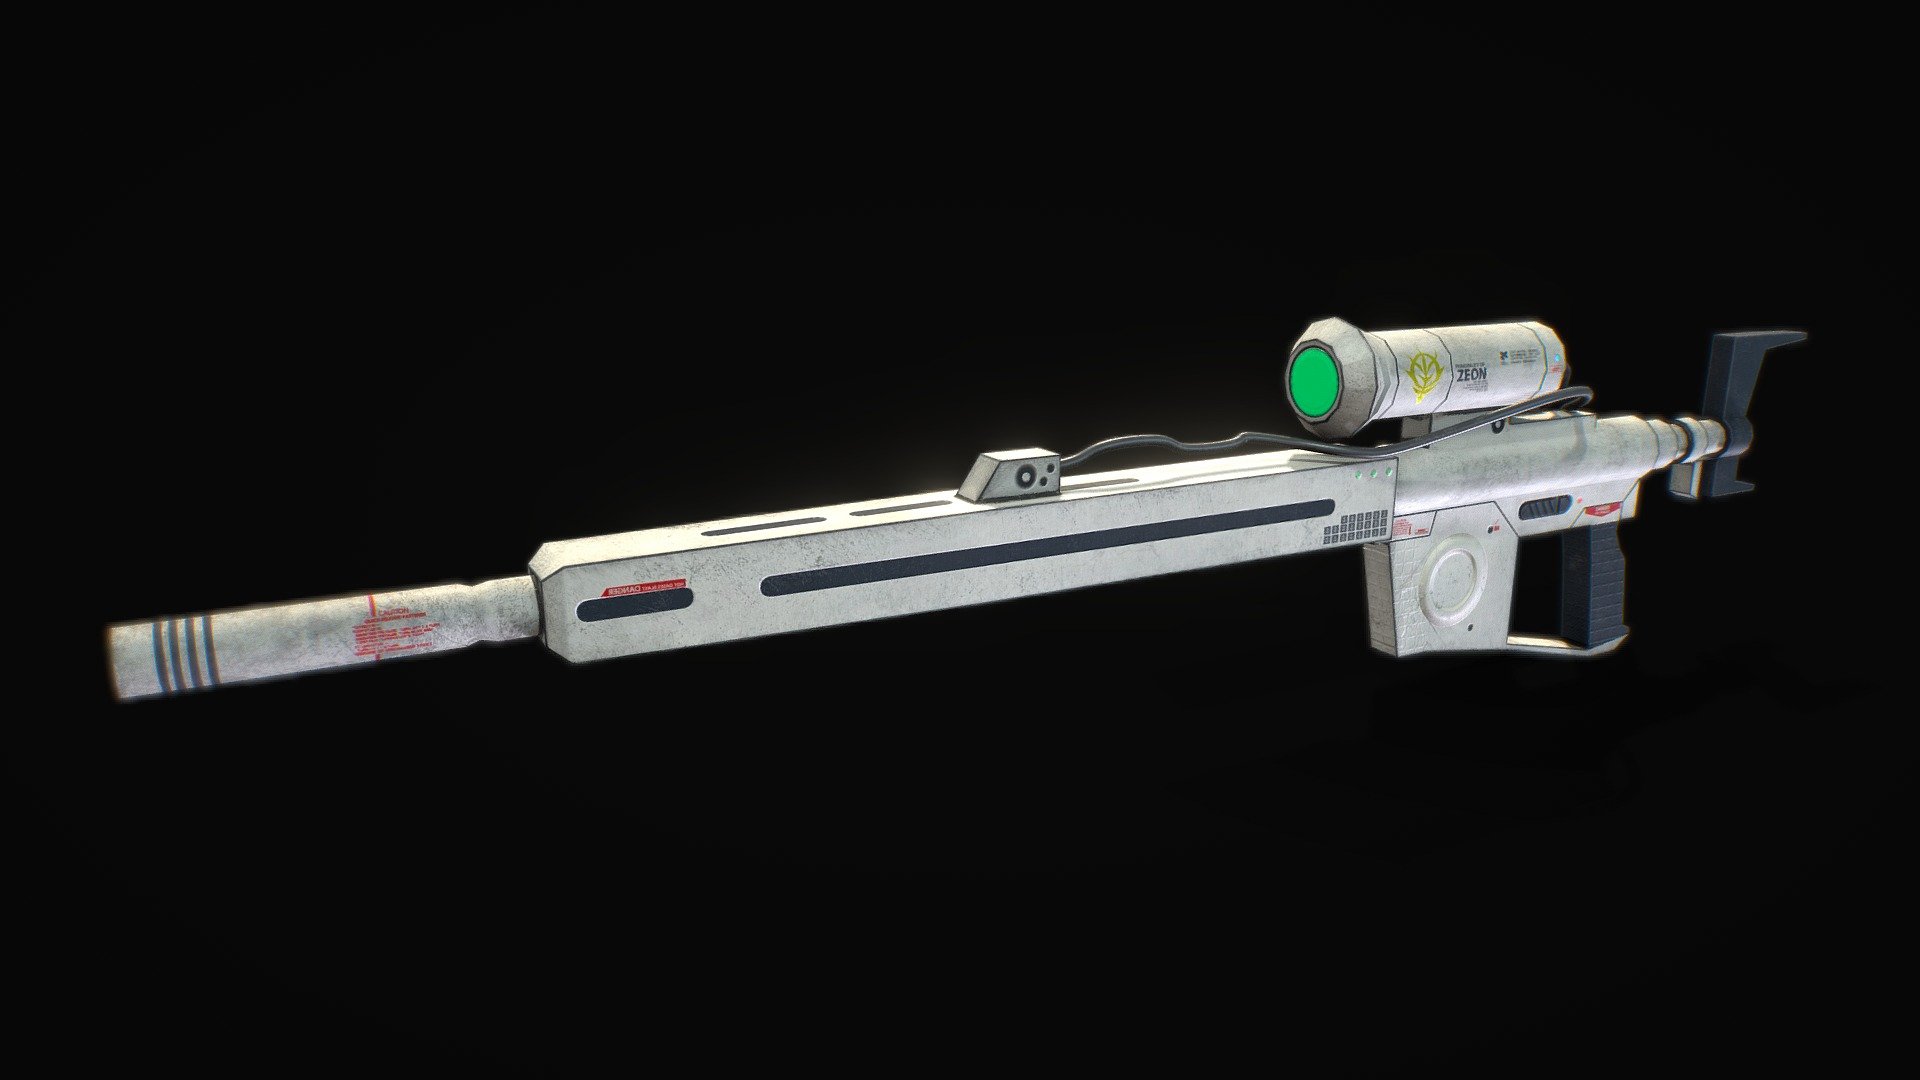 This model was made for One Year War mod of Hearts of Iron IV. Our Mod Steam Home Page https://steamcommunity.com/sharedfiles/filedetails/?id=2064985570 - Beam Sniper Rifle - 3D model by One Year War Mod (@hoi4oneyearwar) 3d model